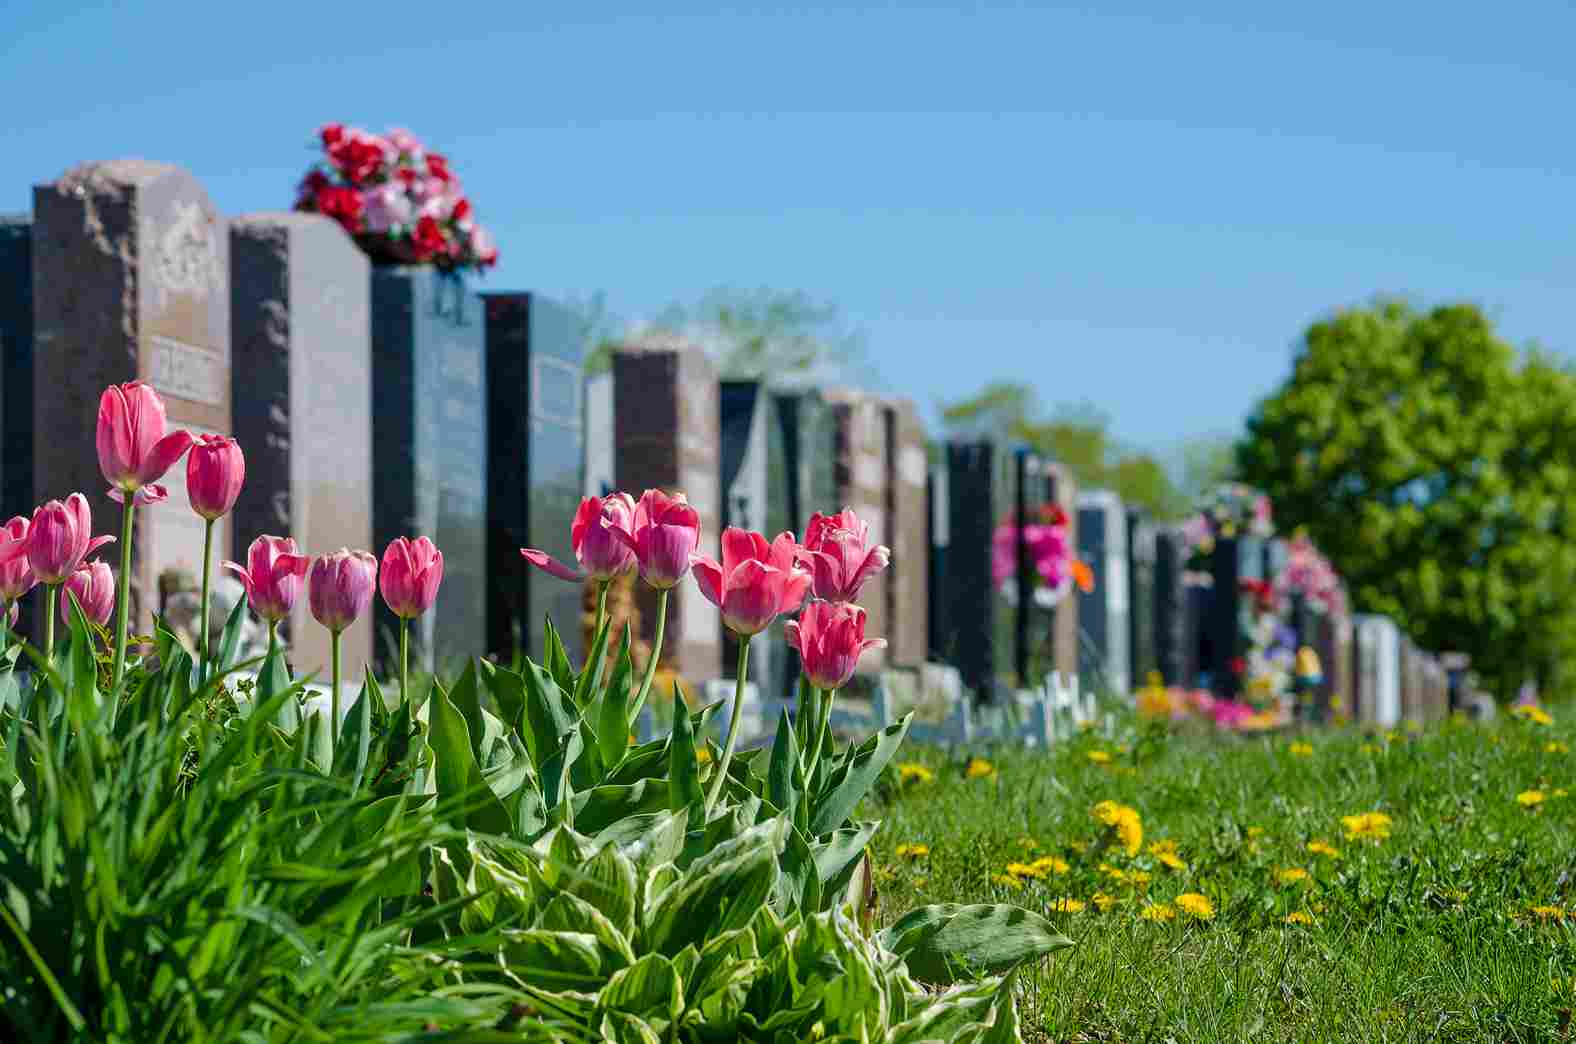 A row of bright pink flowers stands in front of out-of-focus headstones in a cemetery.